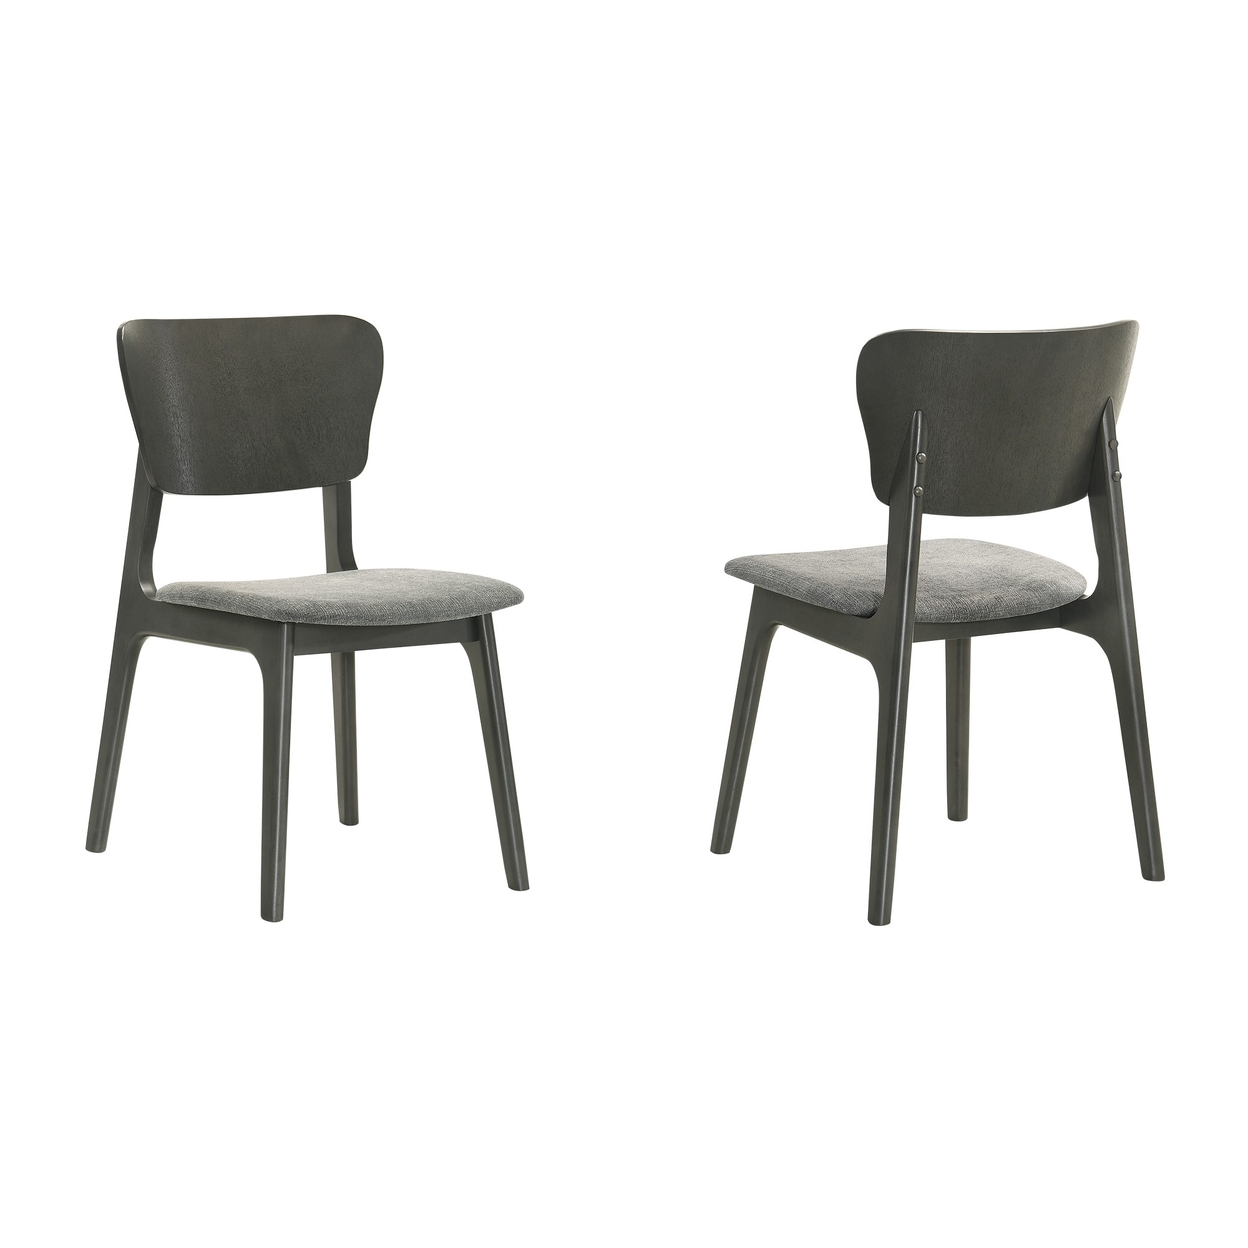 Kalie 24 Inch Dining Chair Set Of 2, Curved Legs, Padded Fabric Seat, Gray - Saltoro Sherpi